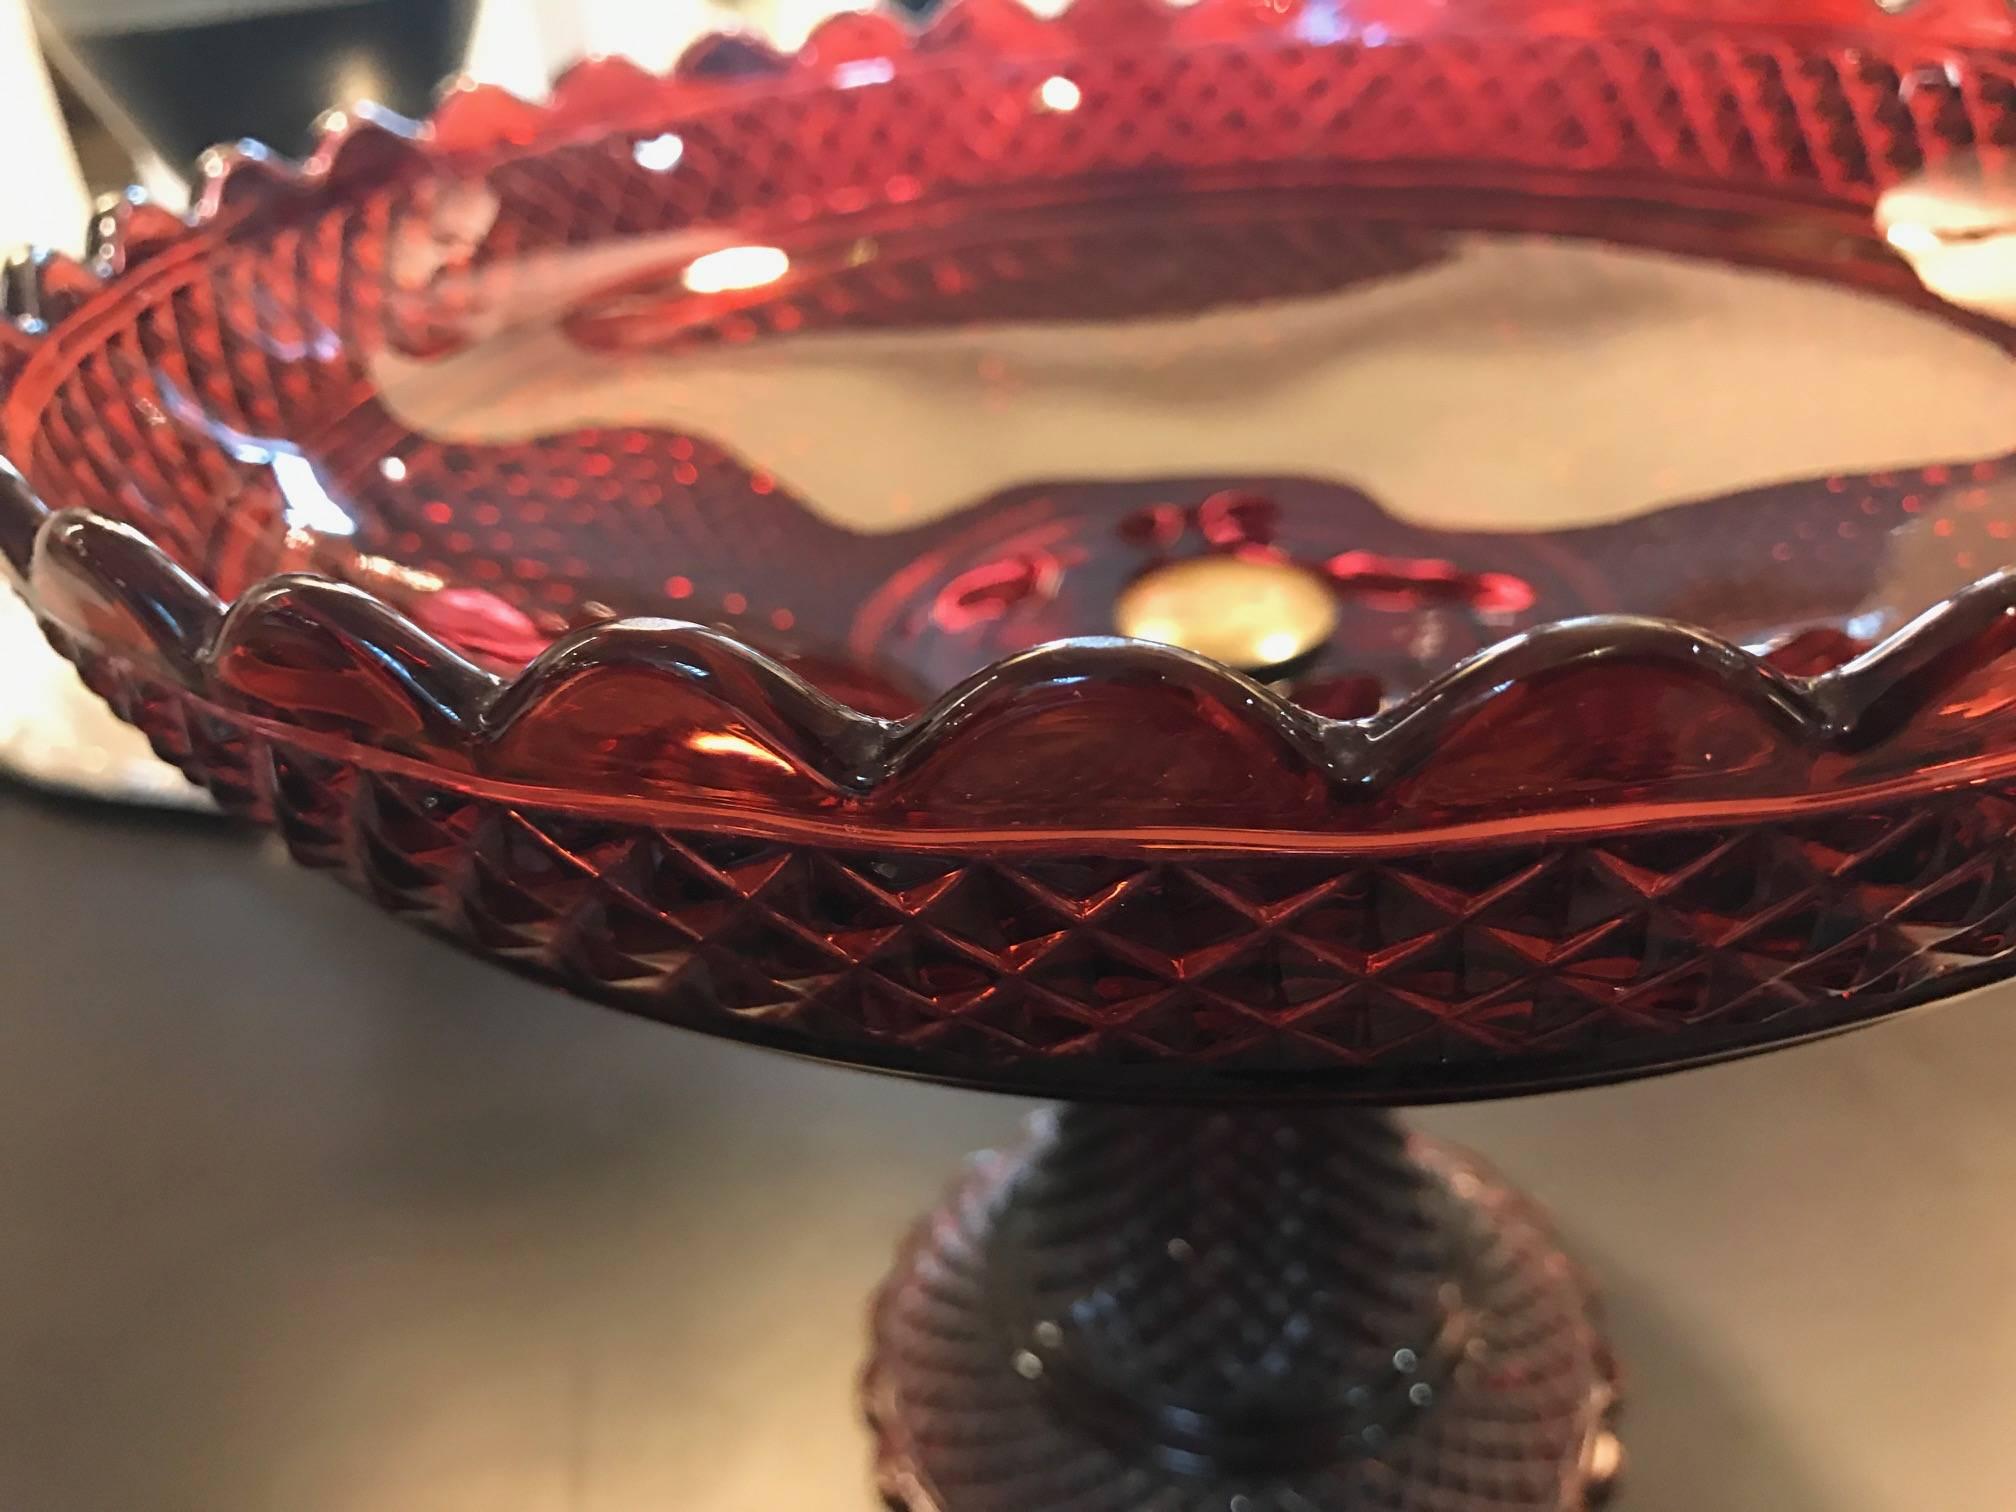 A beautiful signed Baccarat cranberry centre bowl with pedestal. The top is bolted to the bottom as characteristic of mid-19th century molded Baccarat. Each piece has the Baccarat name signed in block letters. Into The scalloped bowl with diamond